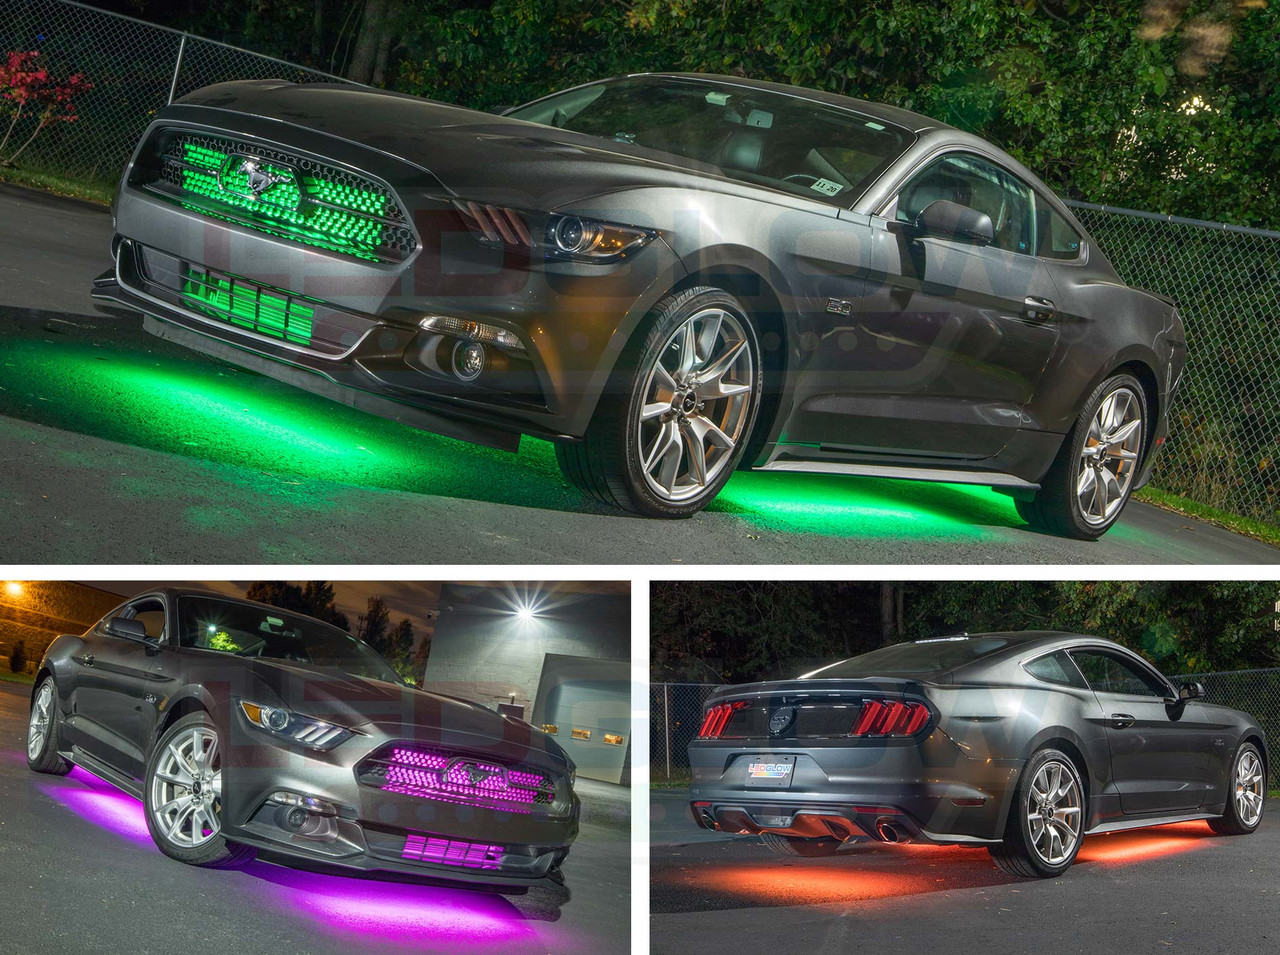 LEDGlow Million Color Underglow LED Lighting Kit for Cars - 4pc Multi Color Underbody Lights - Includes Music Mode Wireless Rem